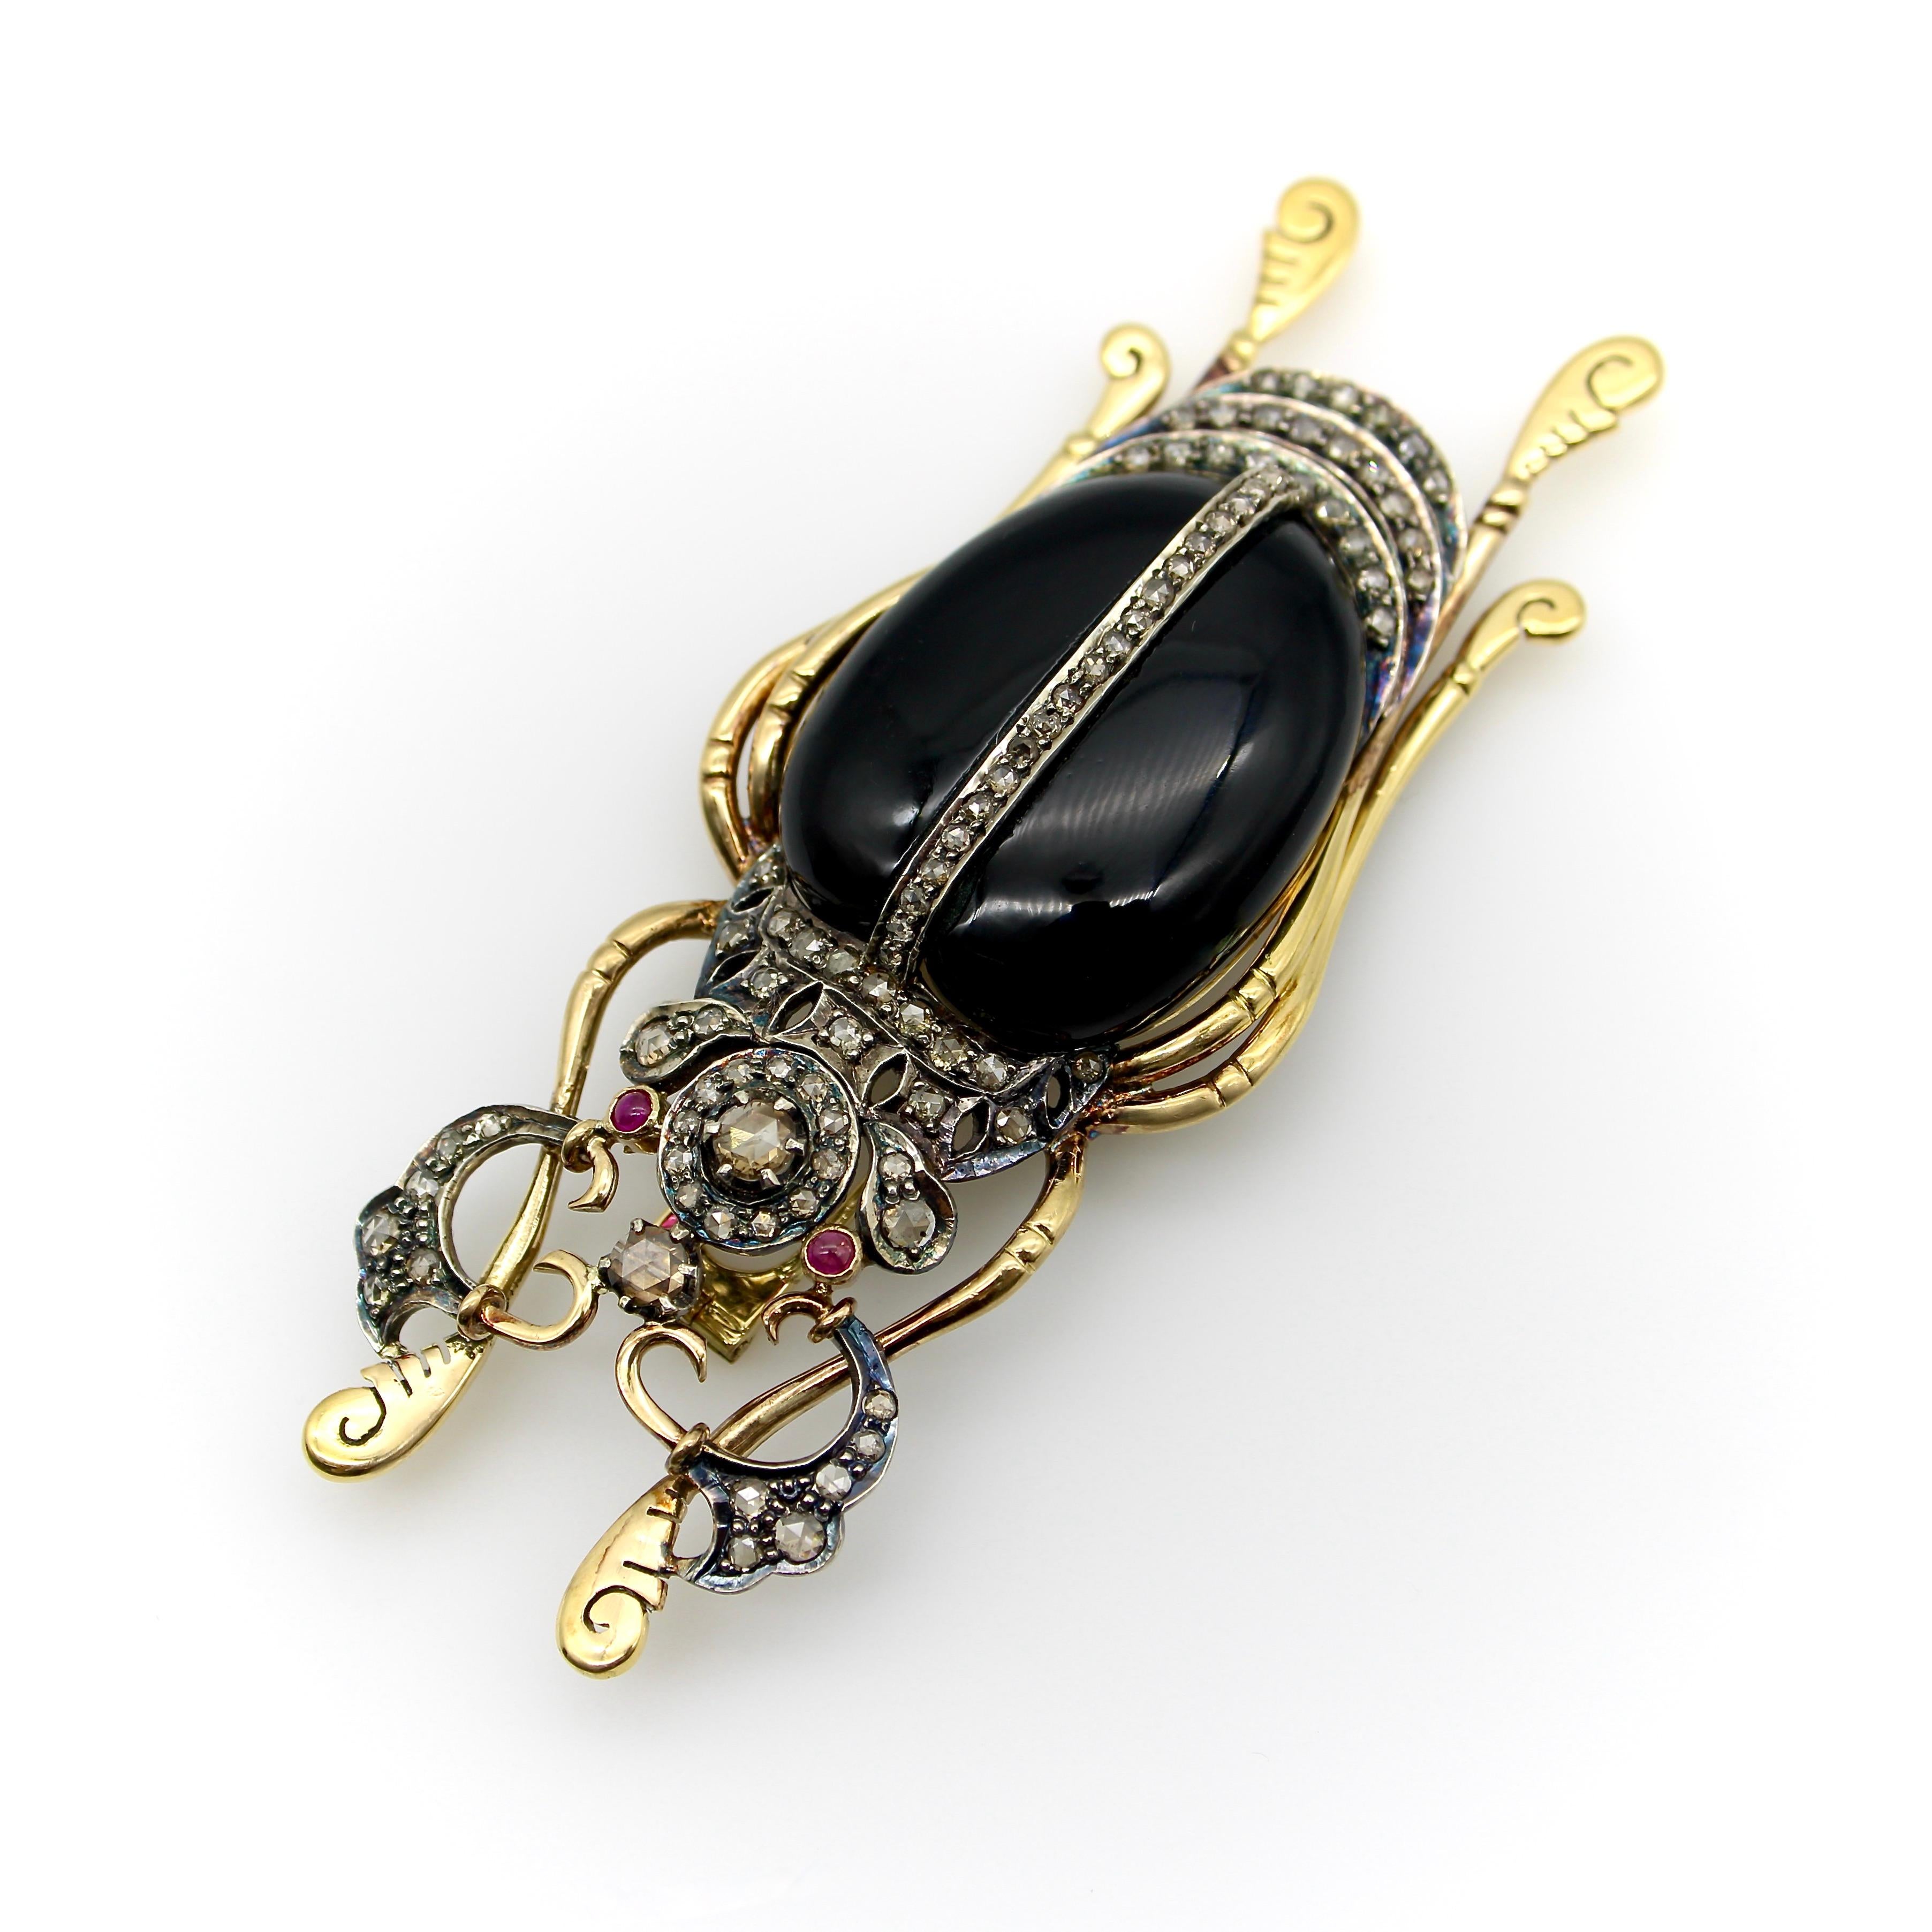 Circa the Edwardian era, this large and impressive Rhinoceros beetle brooch is encrusted with Rose Cut diamonds on an 18k gold and sterling silver body. The insect’s head and antenna are accentuated with patterns of  diamonds in stylized floral